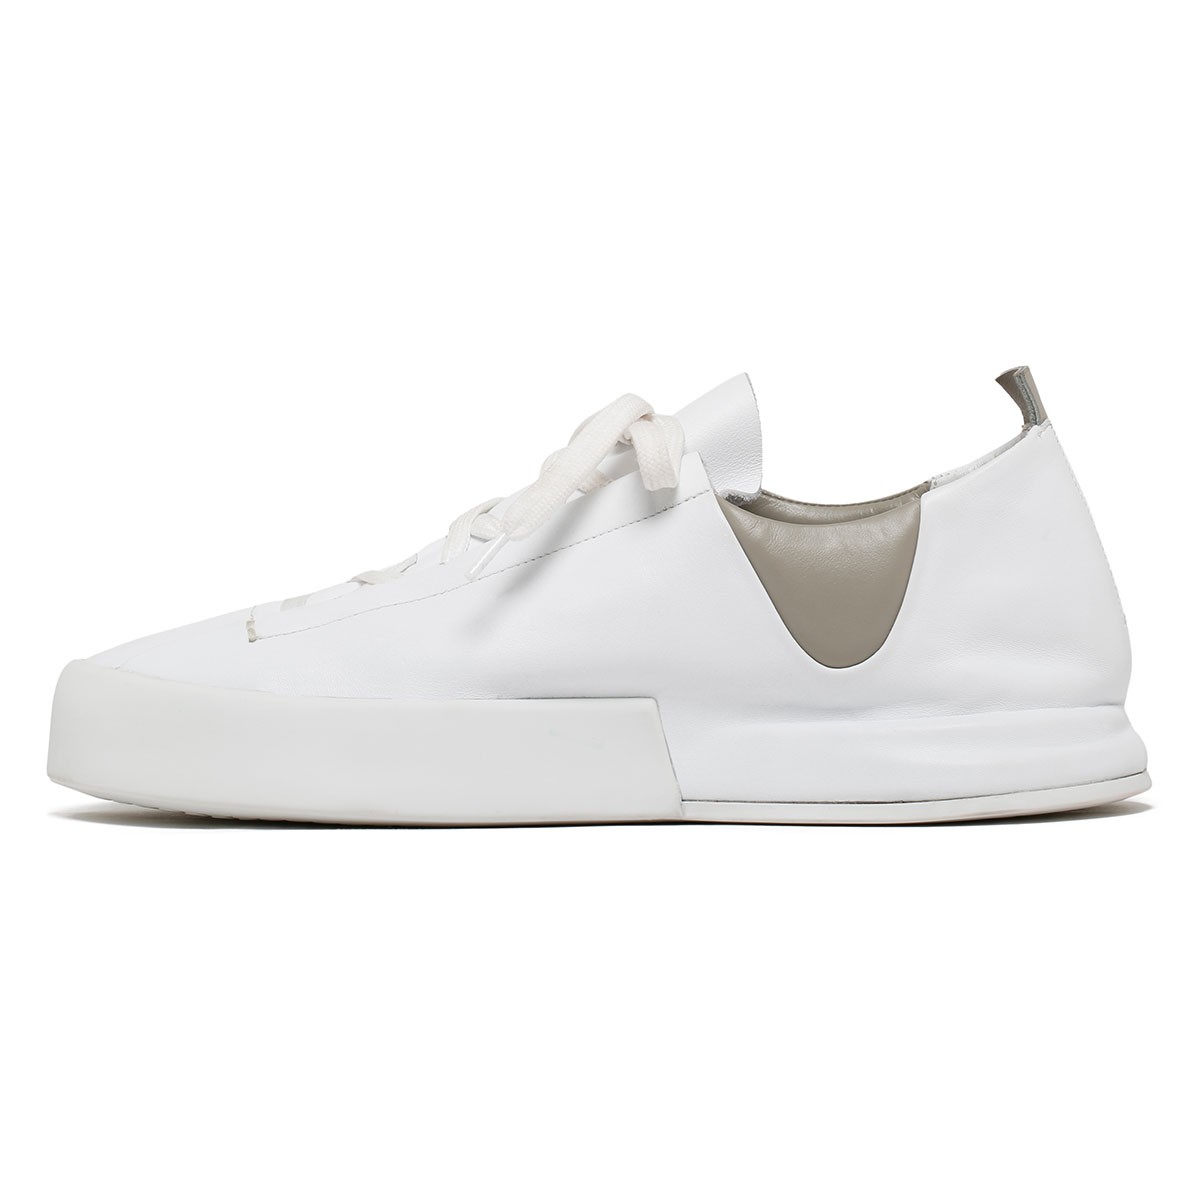 Meucci white and gray sneakers